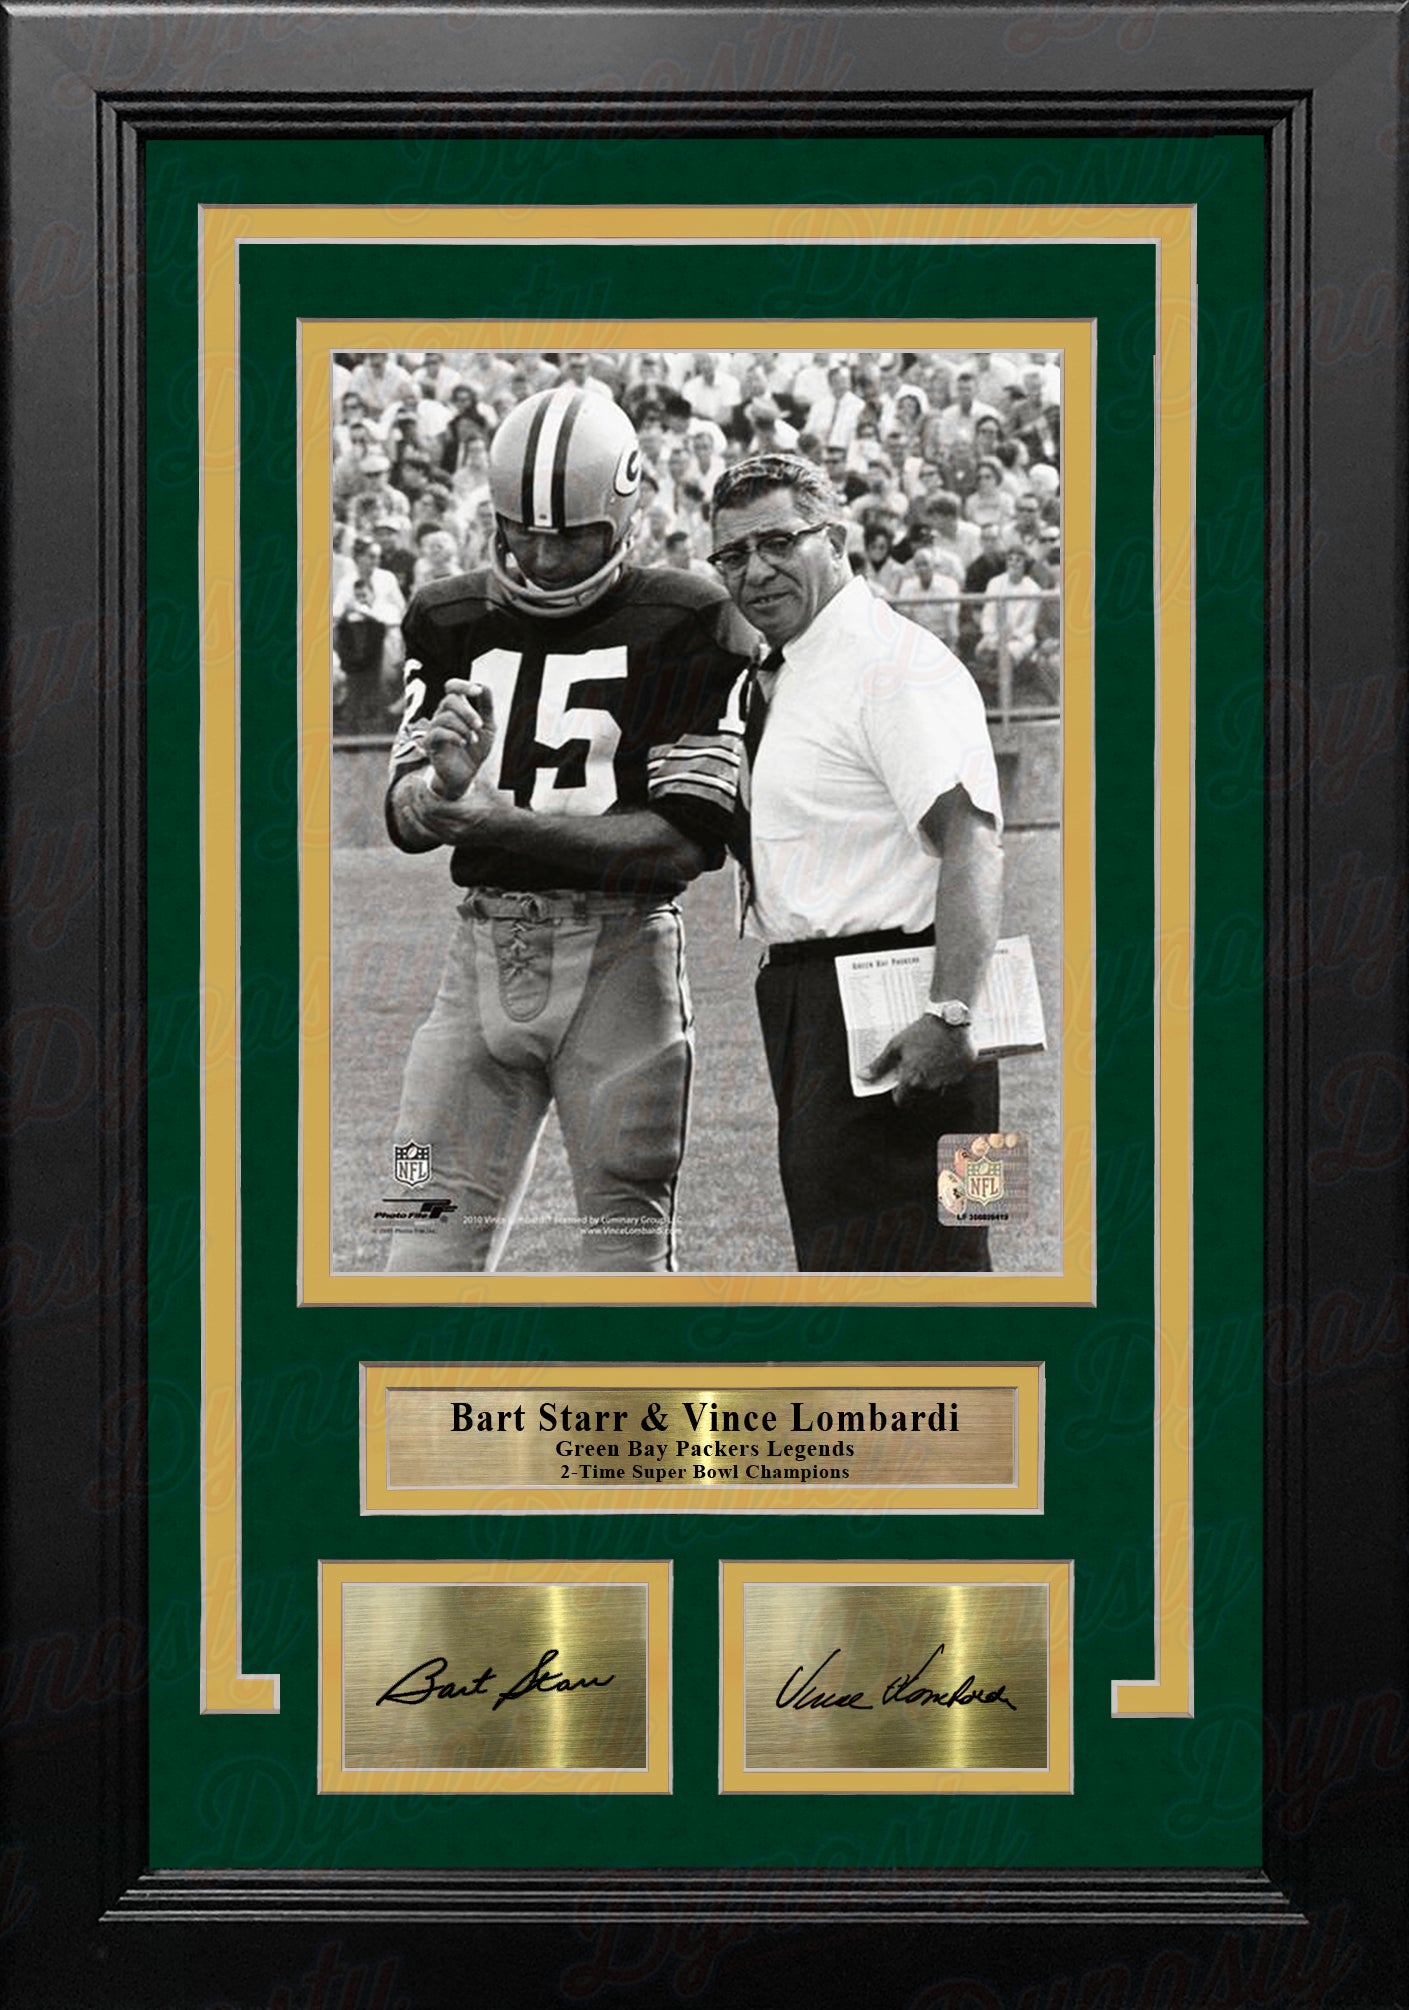 Bart Starr & Vince Lombardi Green Bay Packers 8x10 Framed Football Photo  with Engraved Autographs